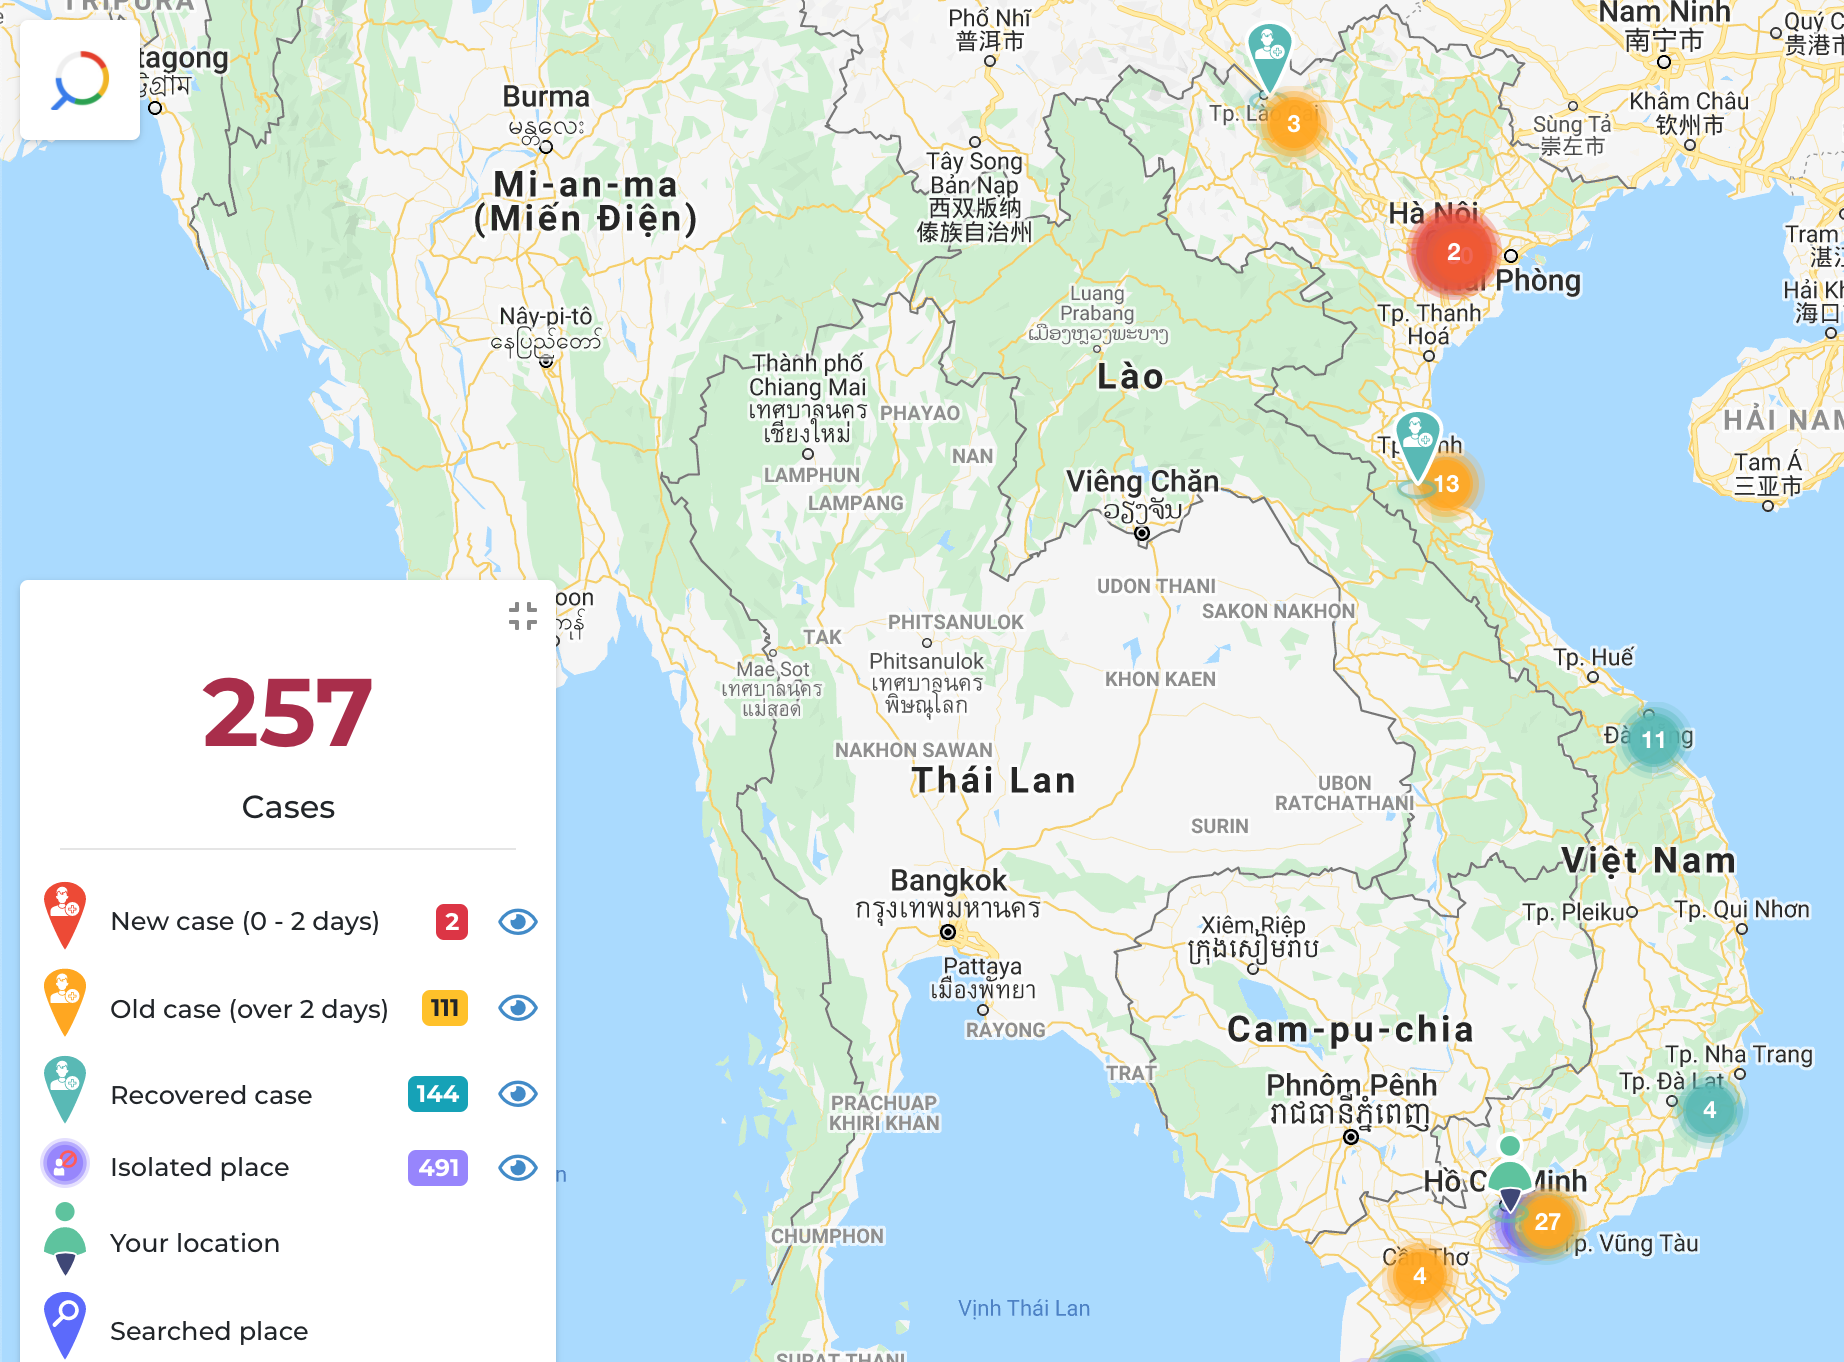 Homemade live map keeps people updated on COVID-19 in Vietnam